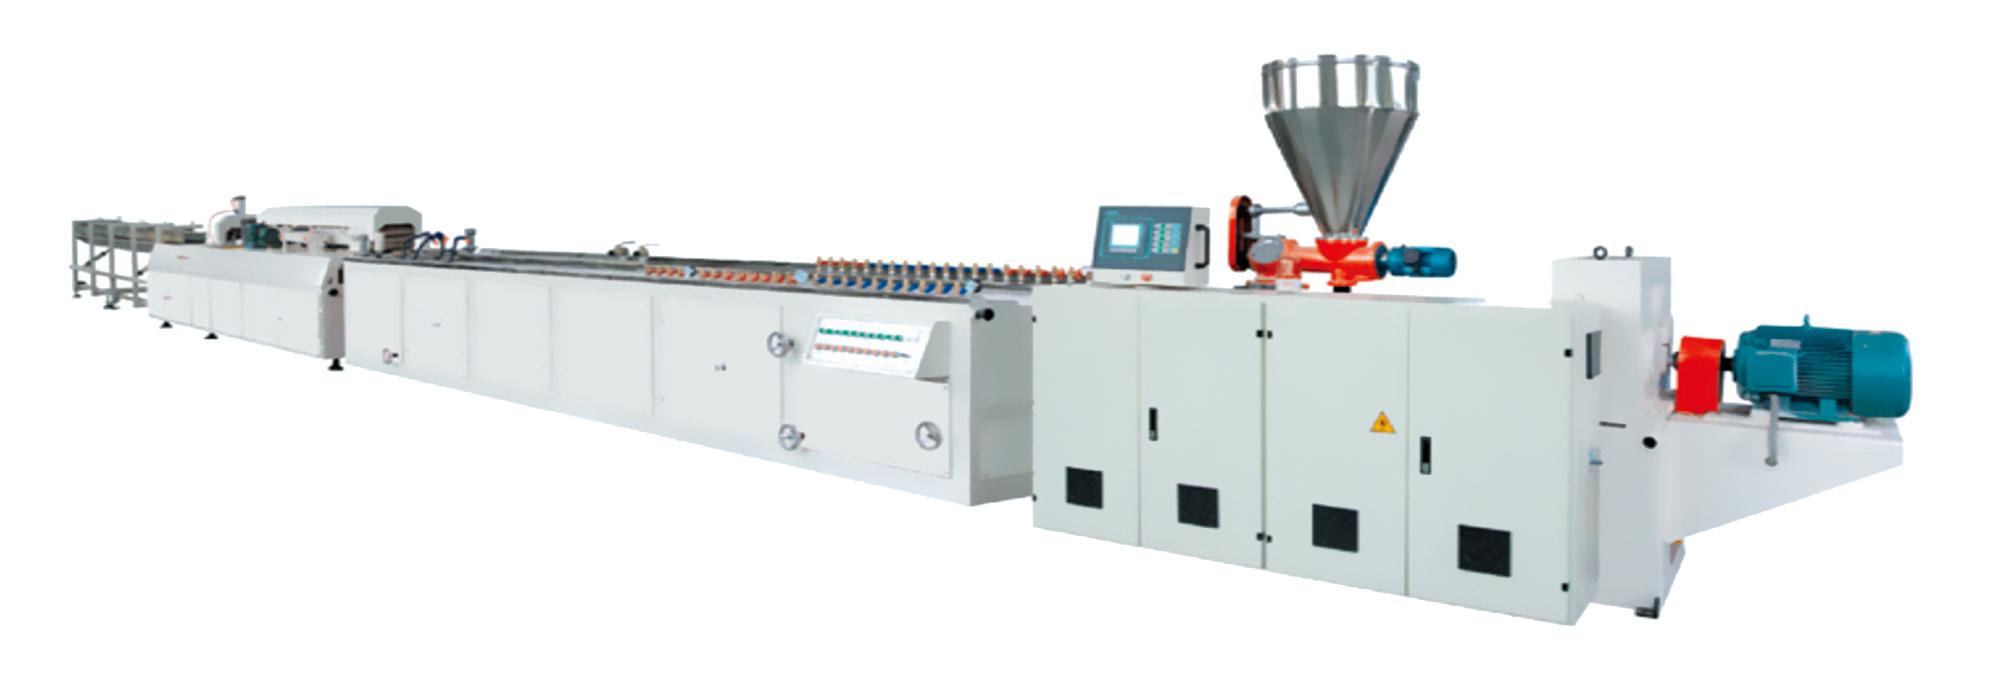 PVC frofile&foamed extrusion line